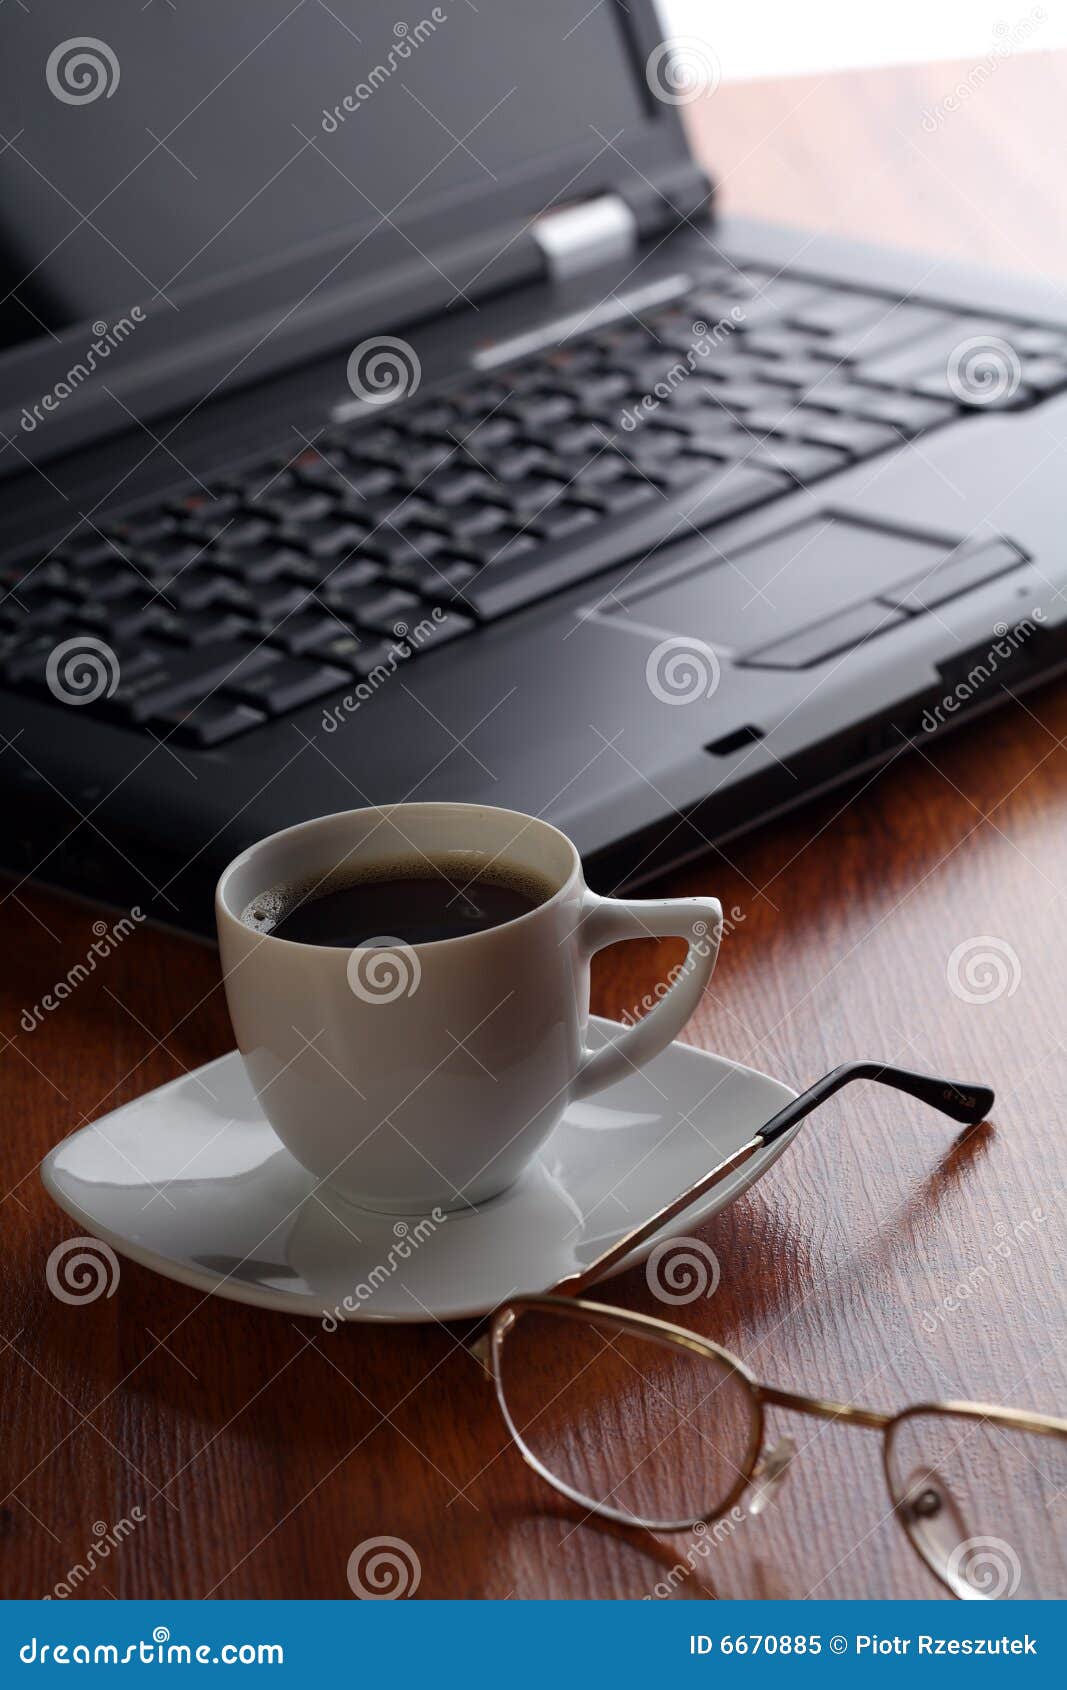 bussiness theme with laptop and coffee